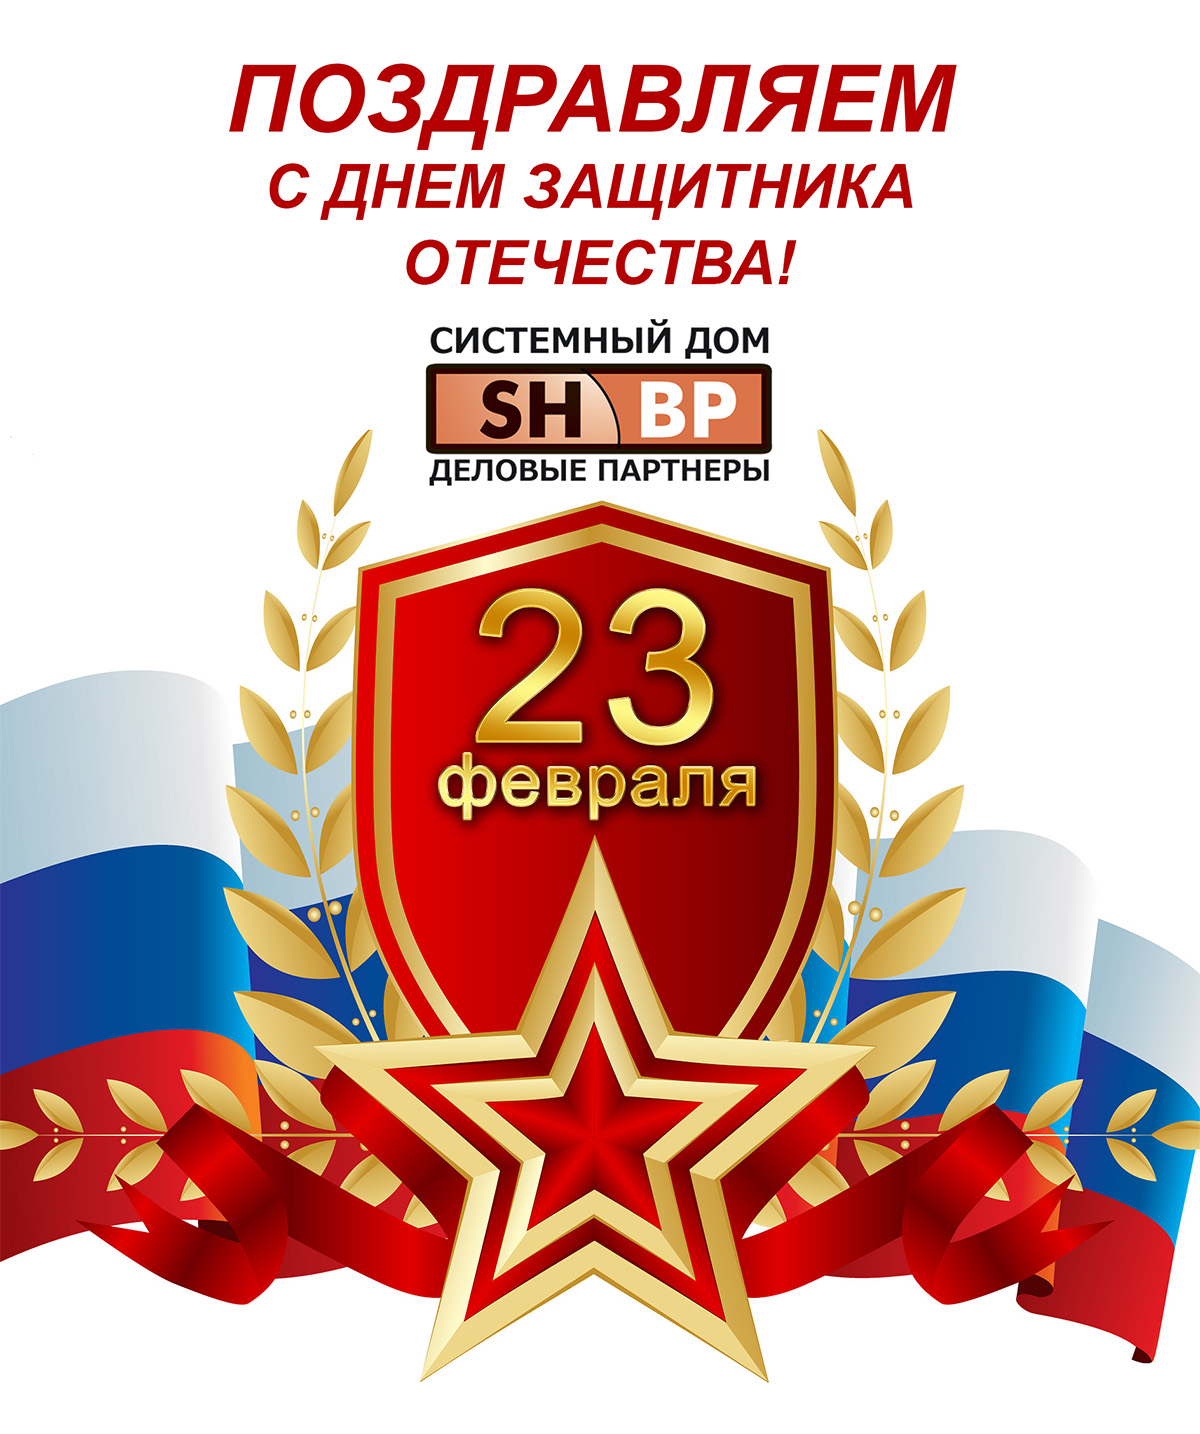 Russian Defenders Day!